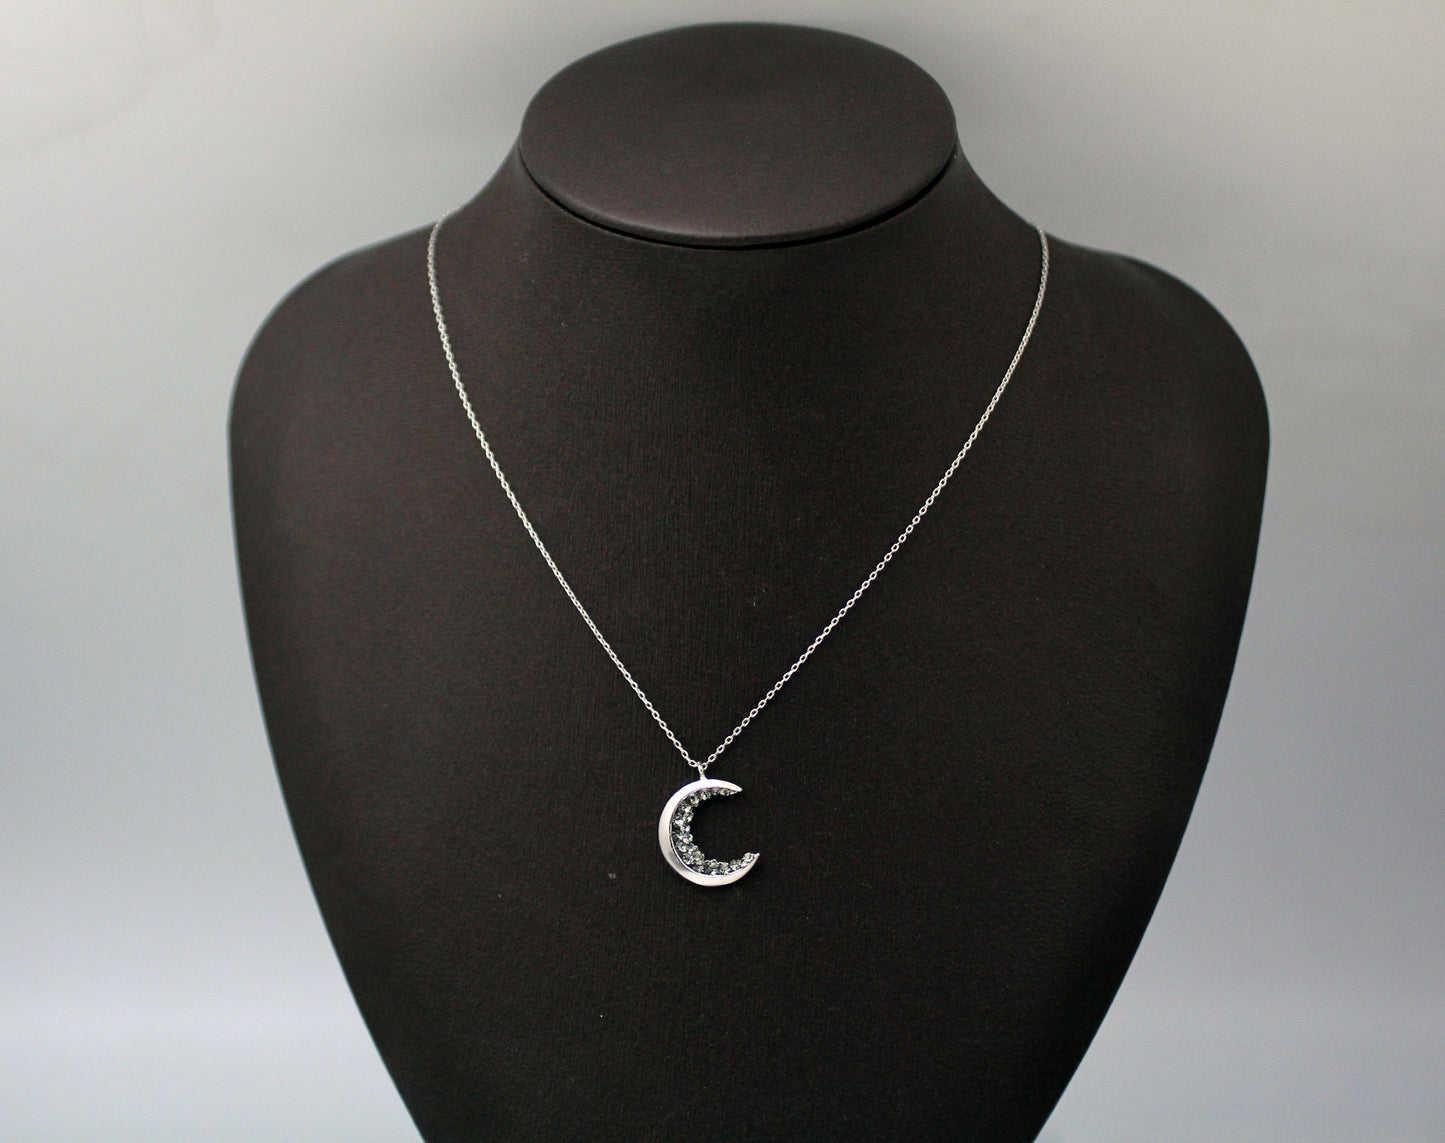 Crescent moon pendant Necklace detailed with Black Diamond Crystals